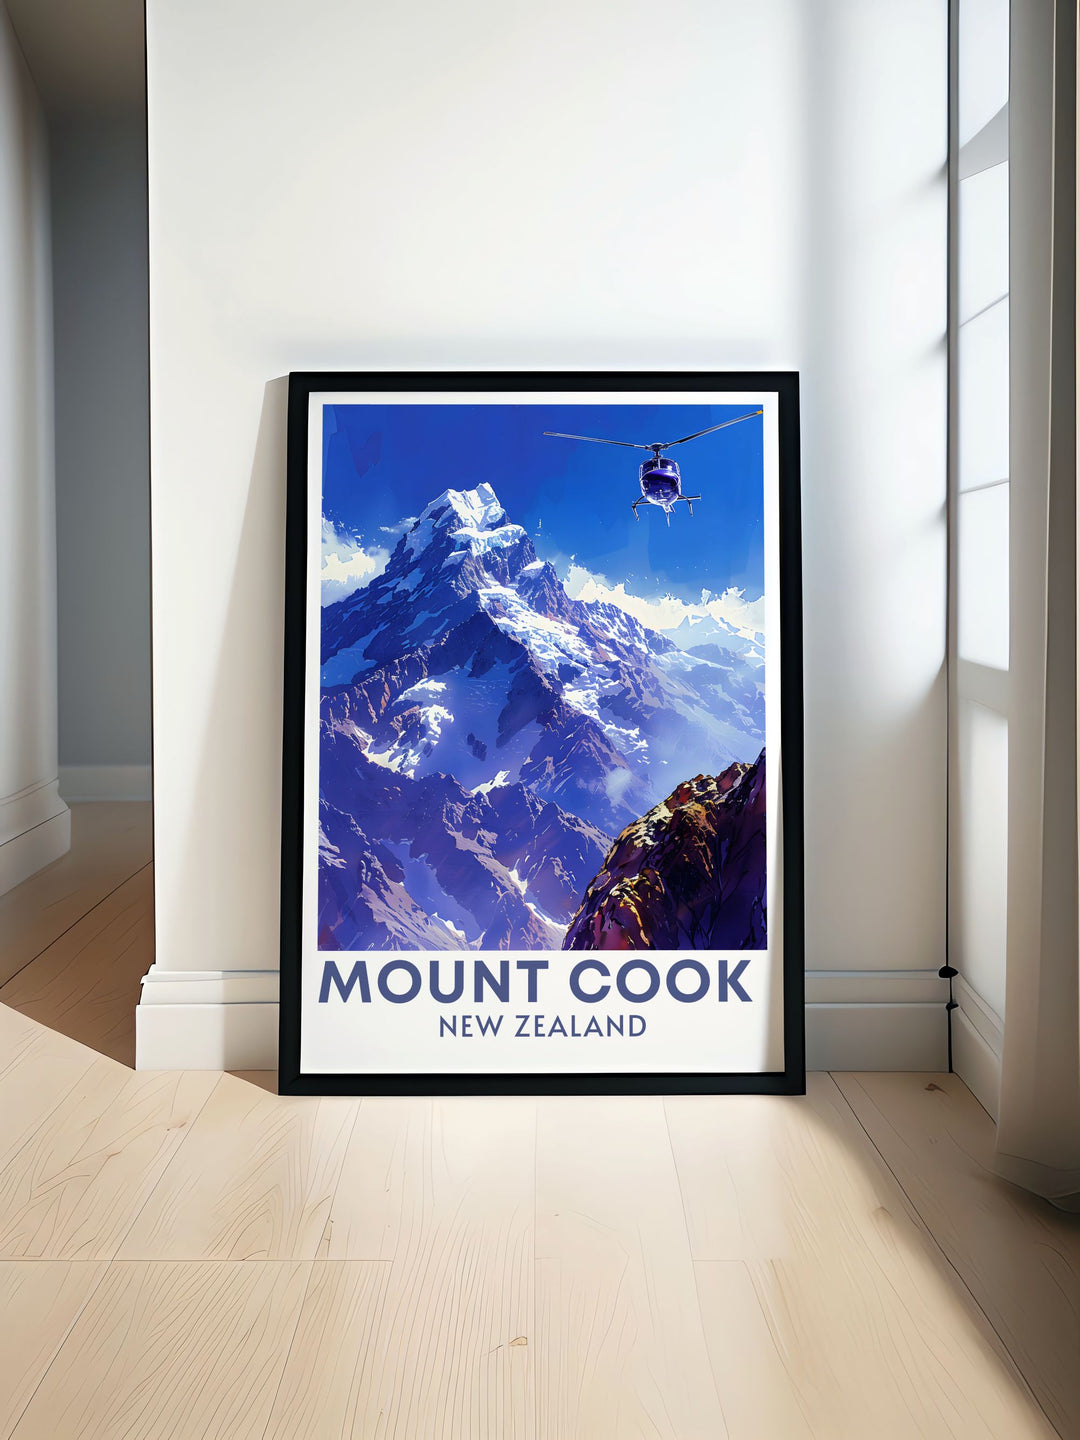 Mt Cook travel poster showcasing New Zealands highest peak Aoraki Mount Cook with stunning details perfect for adding a touch of nature and adventure to your home decor and ideal for lovers of vintage travel prints and national park artwork